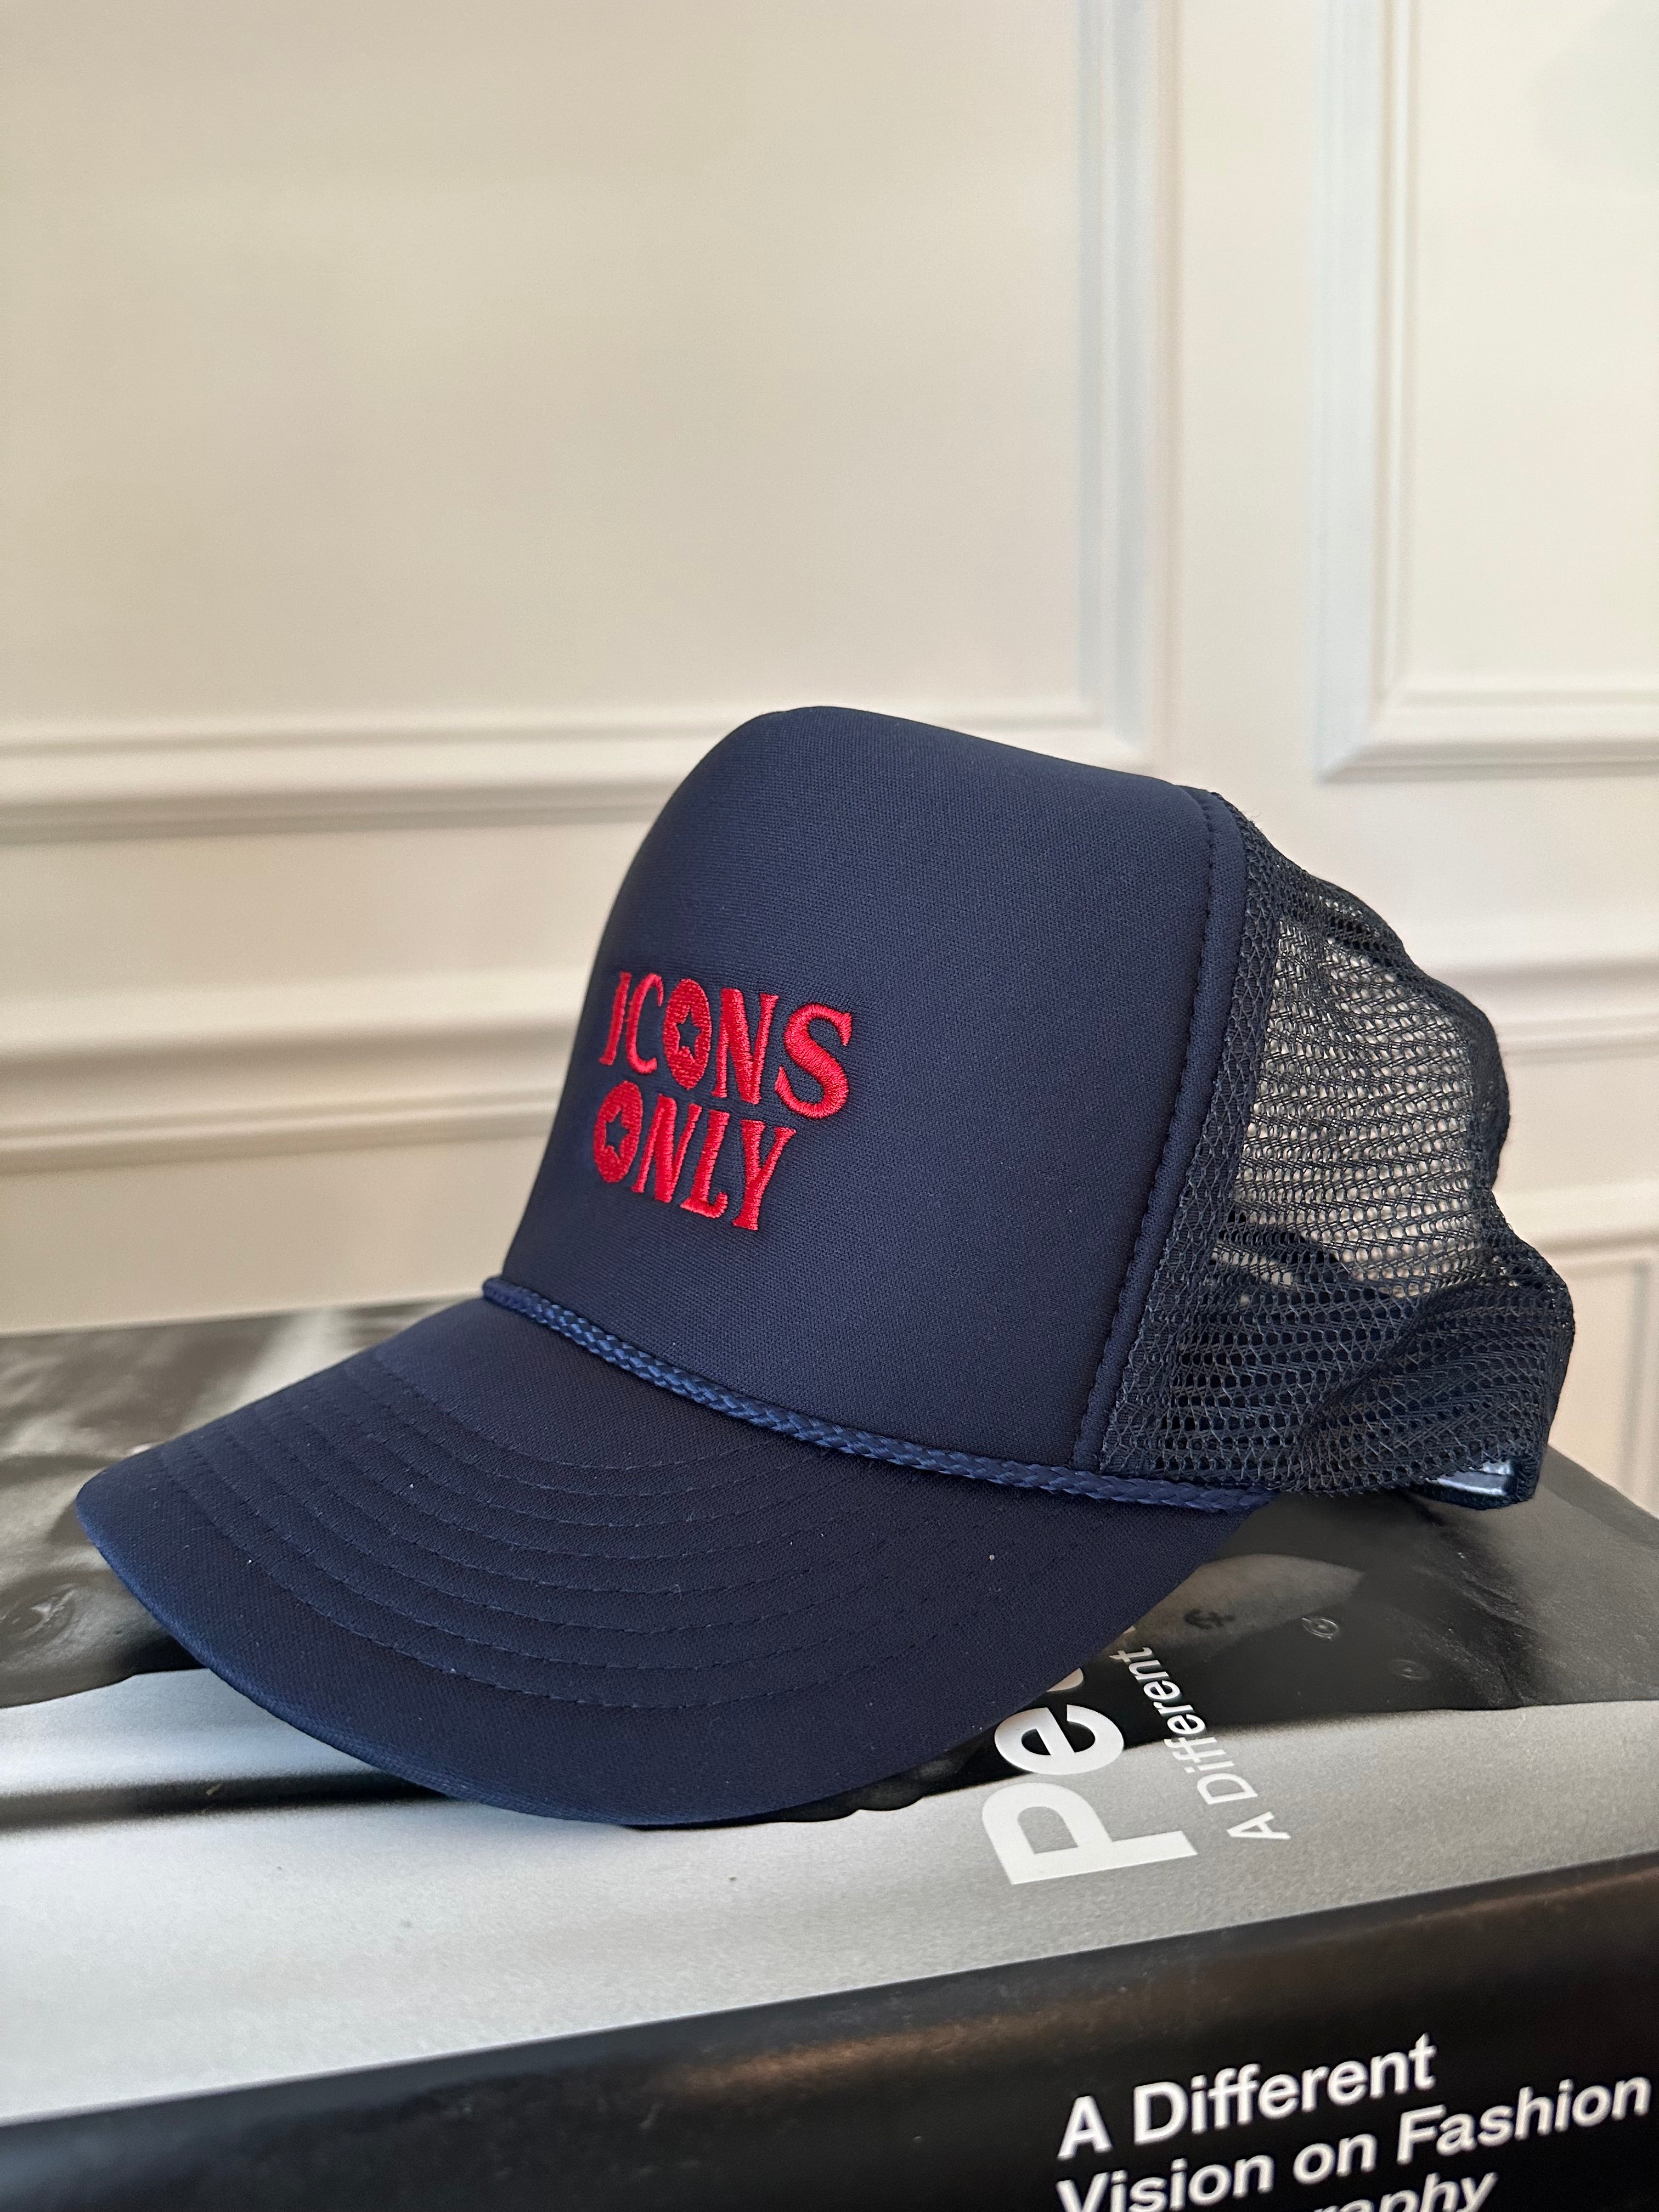 Icons Only Hat- Ole Miss